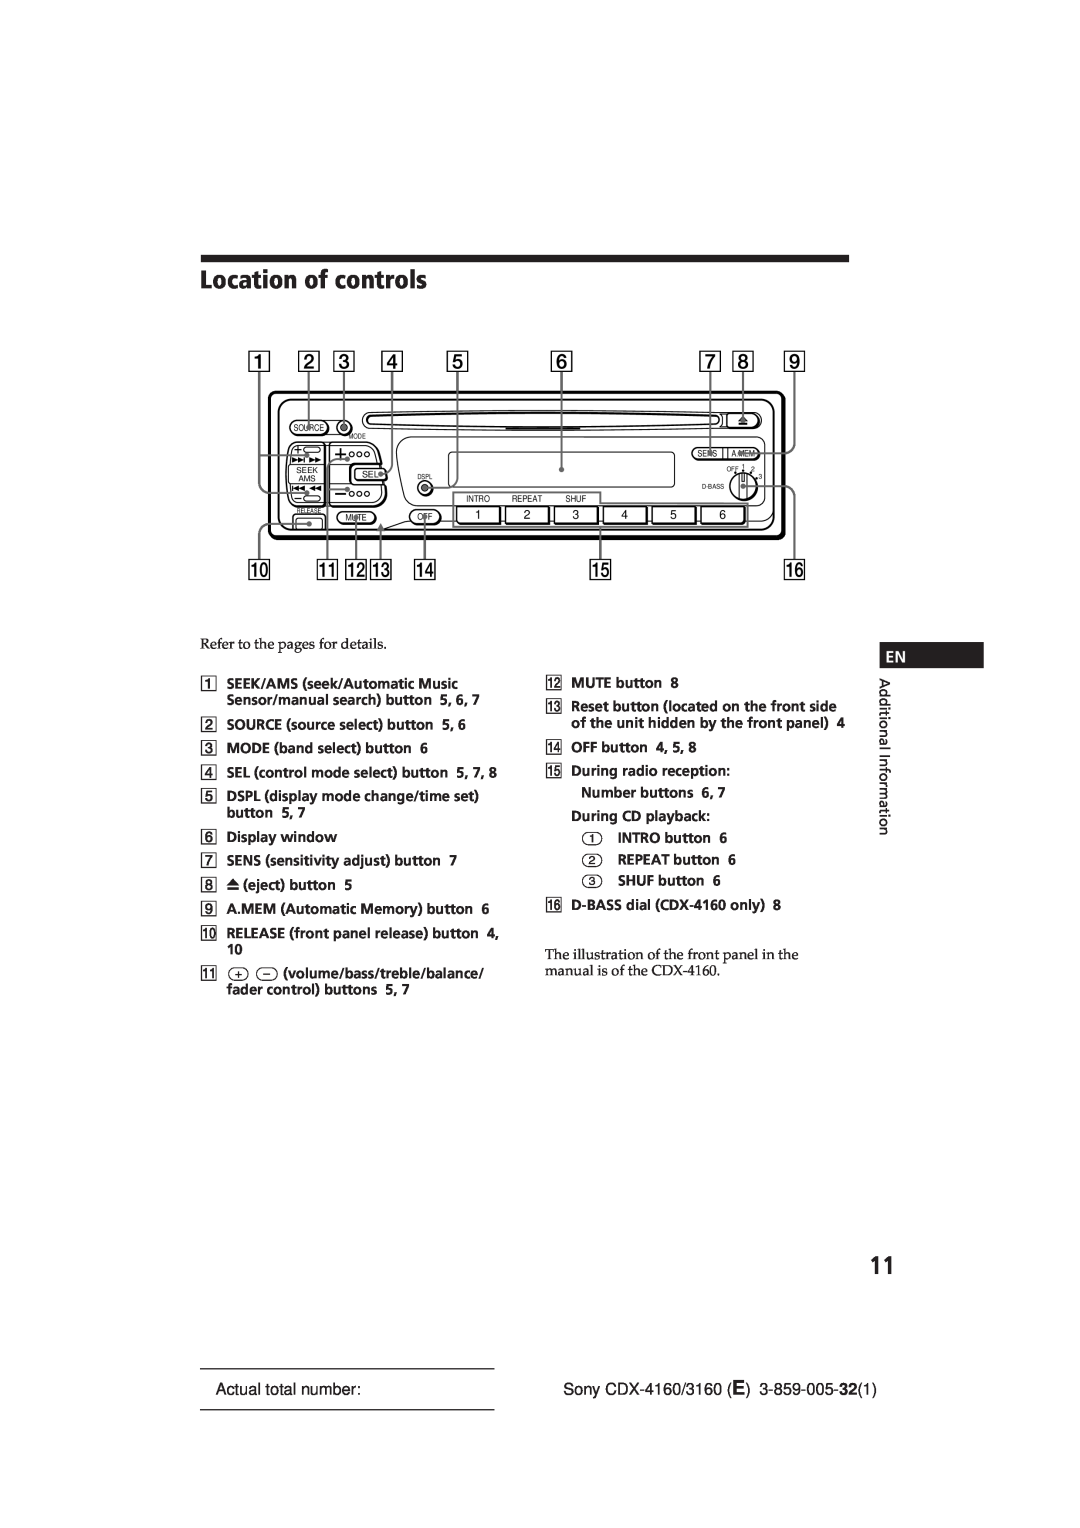 Sony 0 CDX-3160, CDX-416 operating instructions Location of controls, Actual total number 